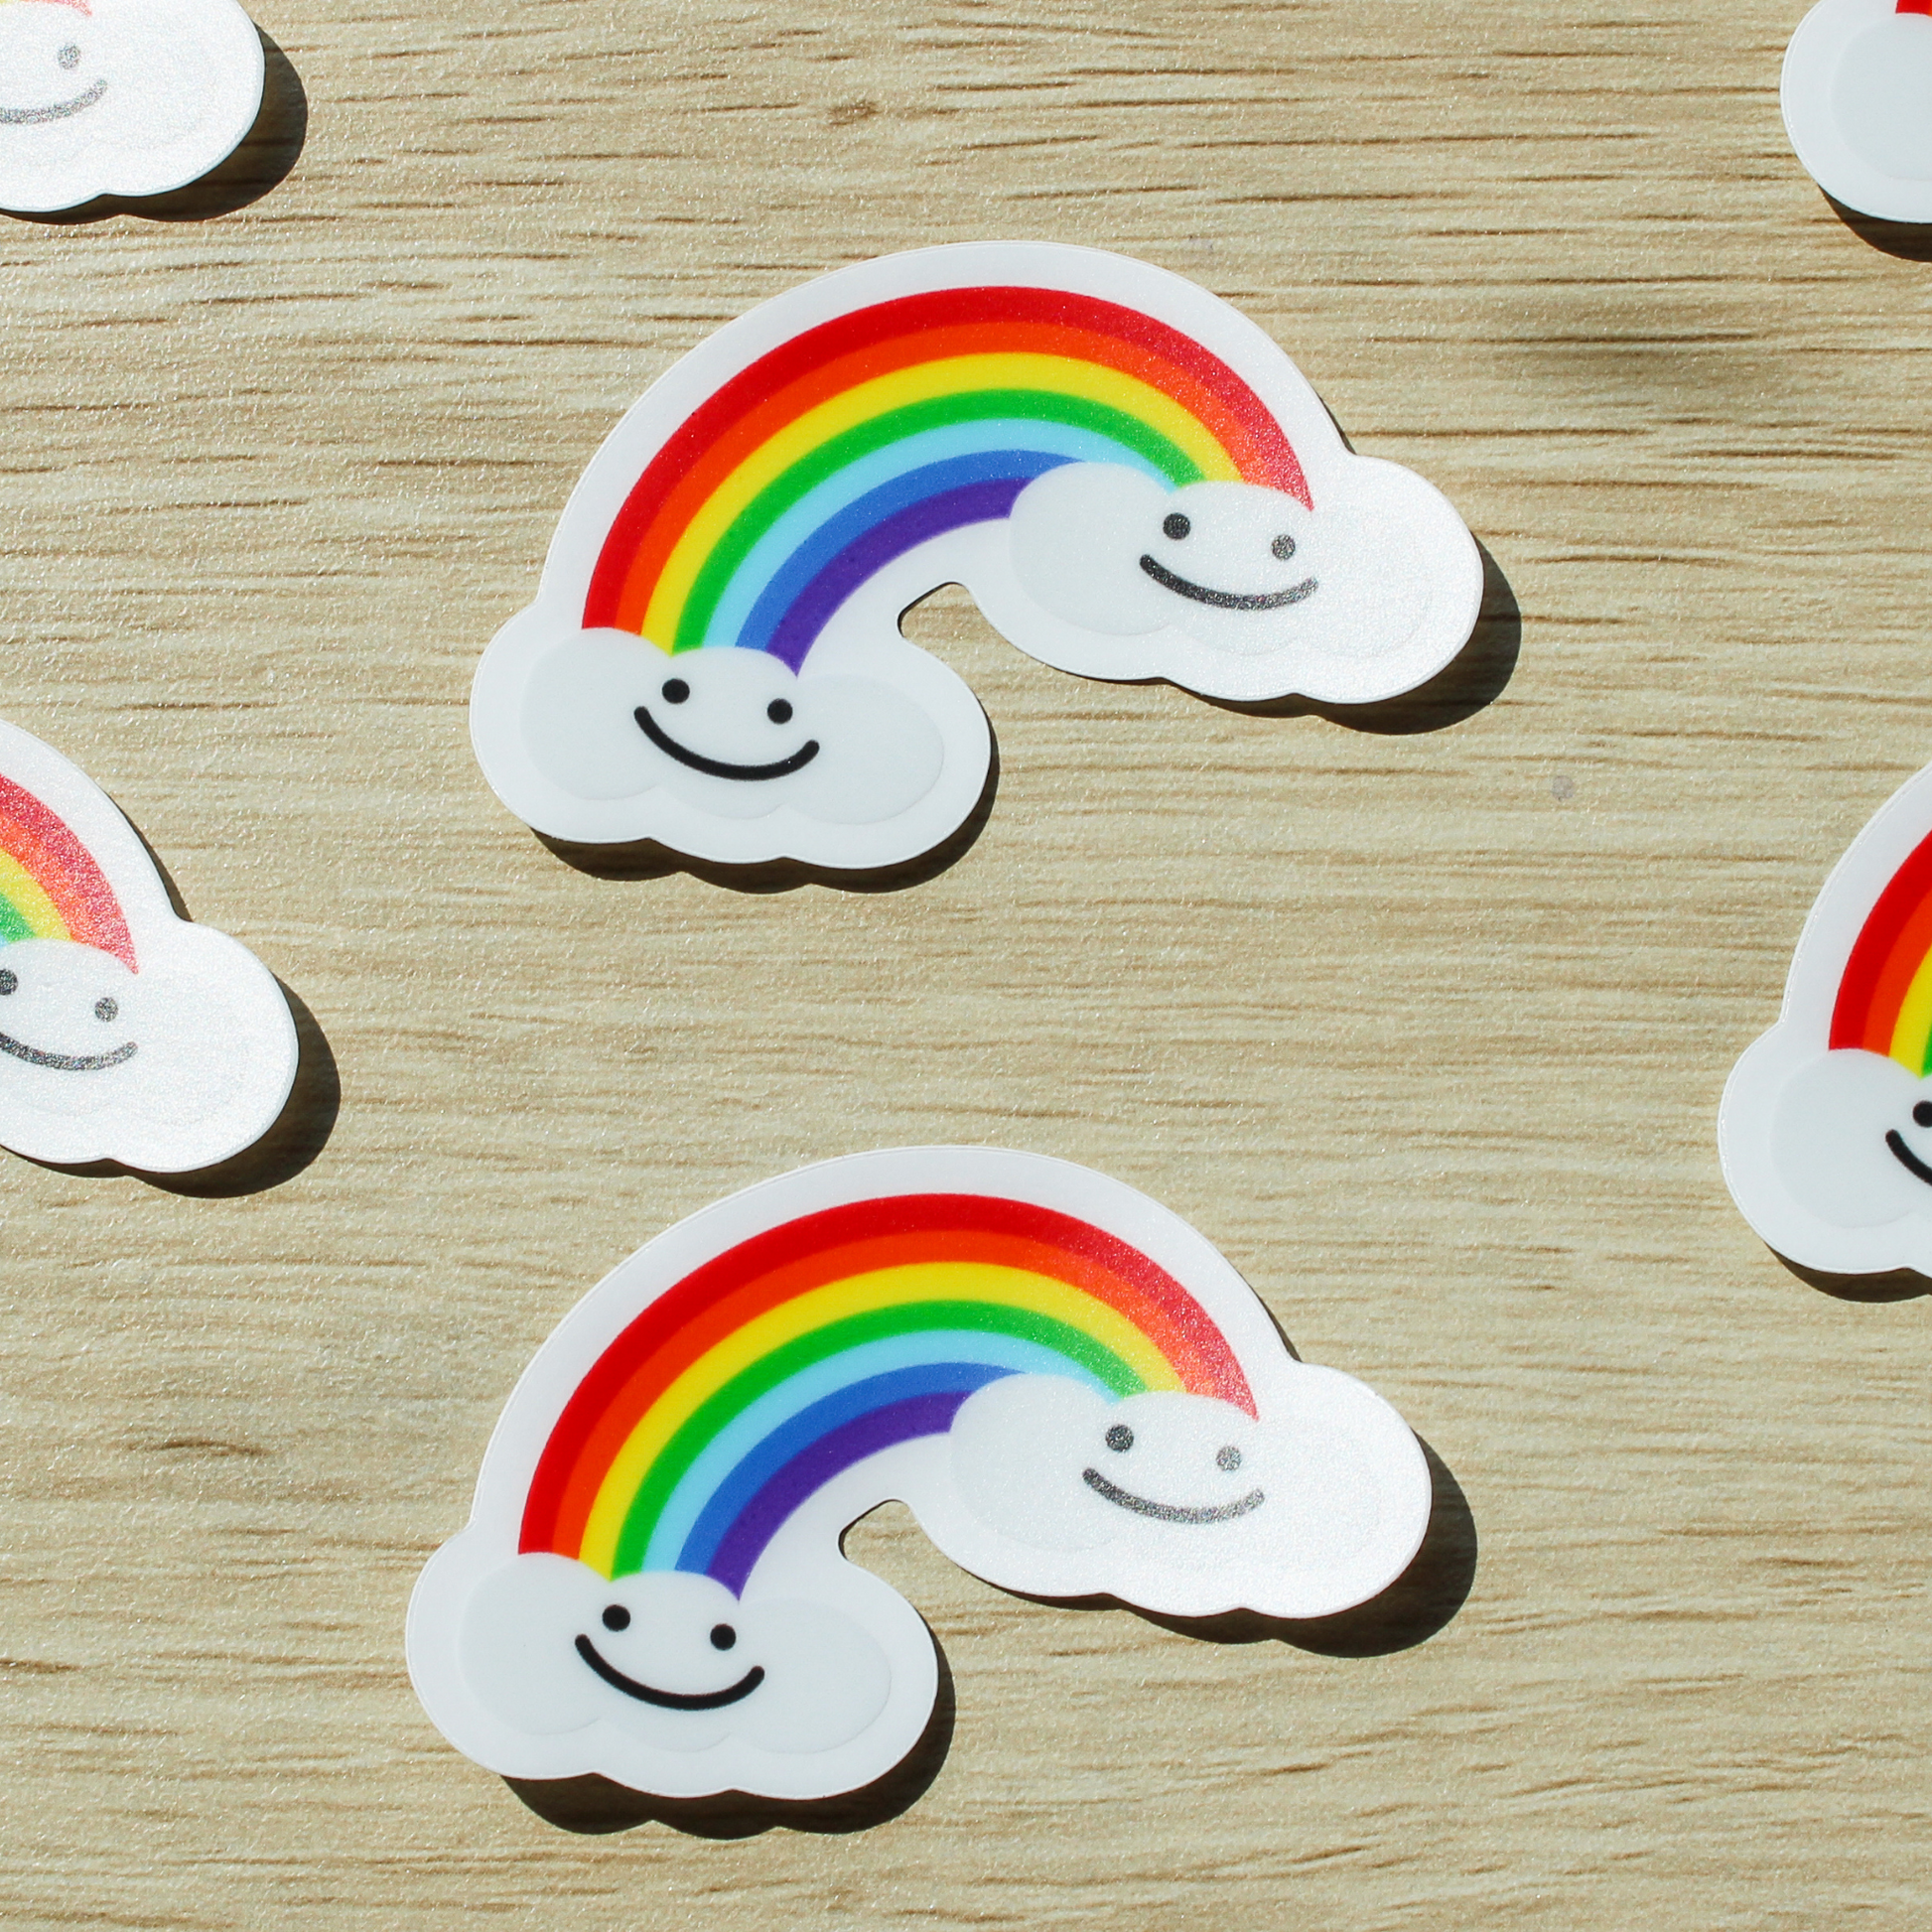 A wooden background with several smiling rainbow cloud stickers.